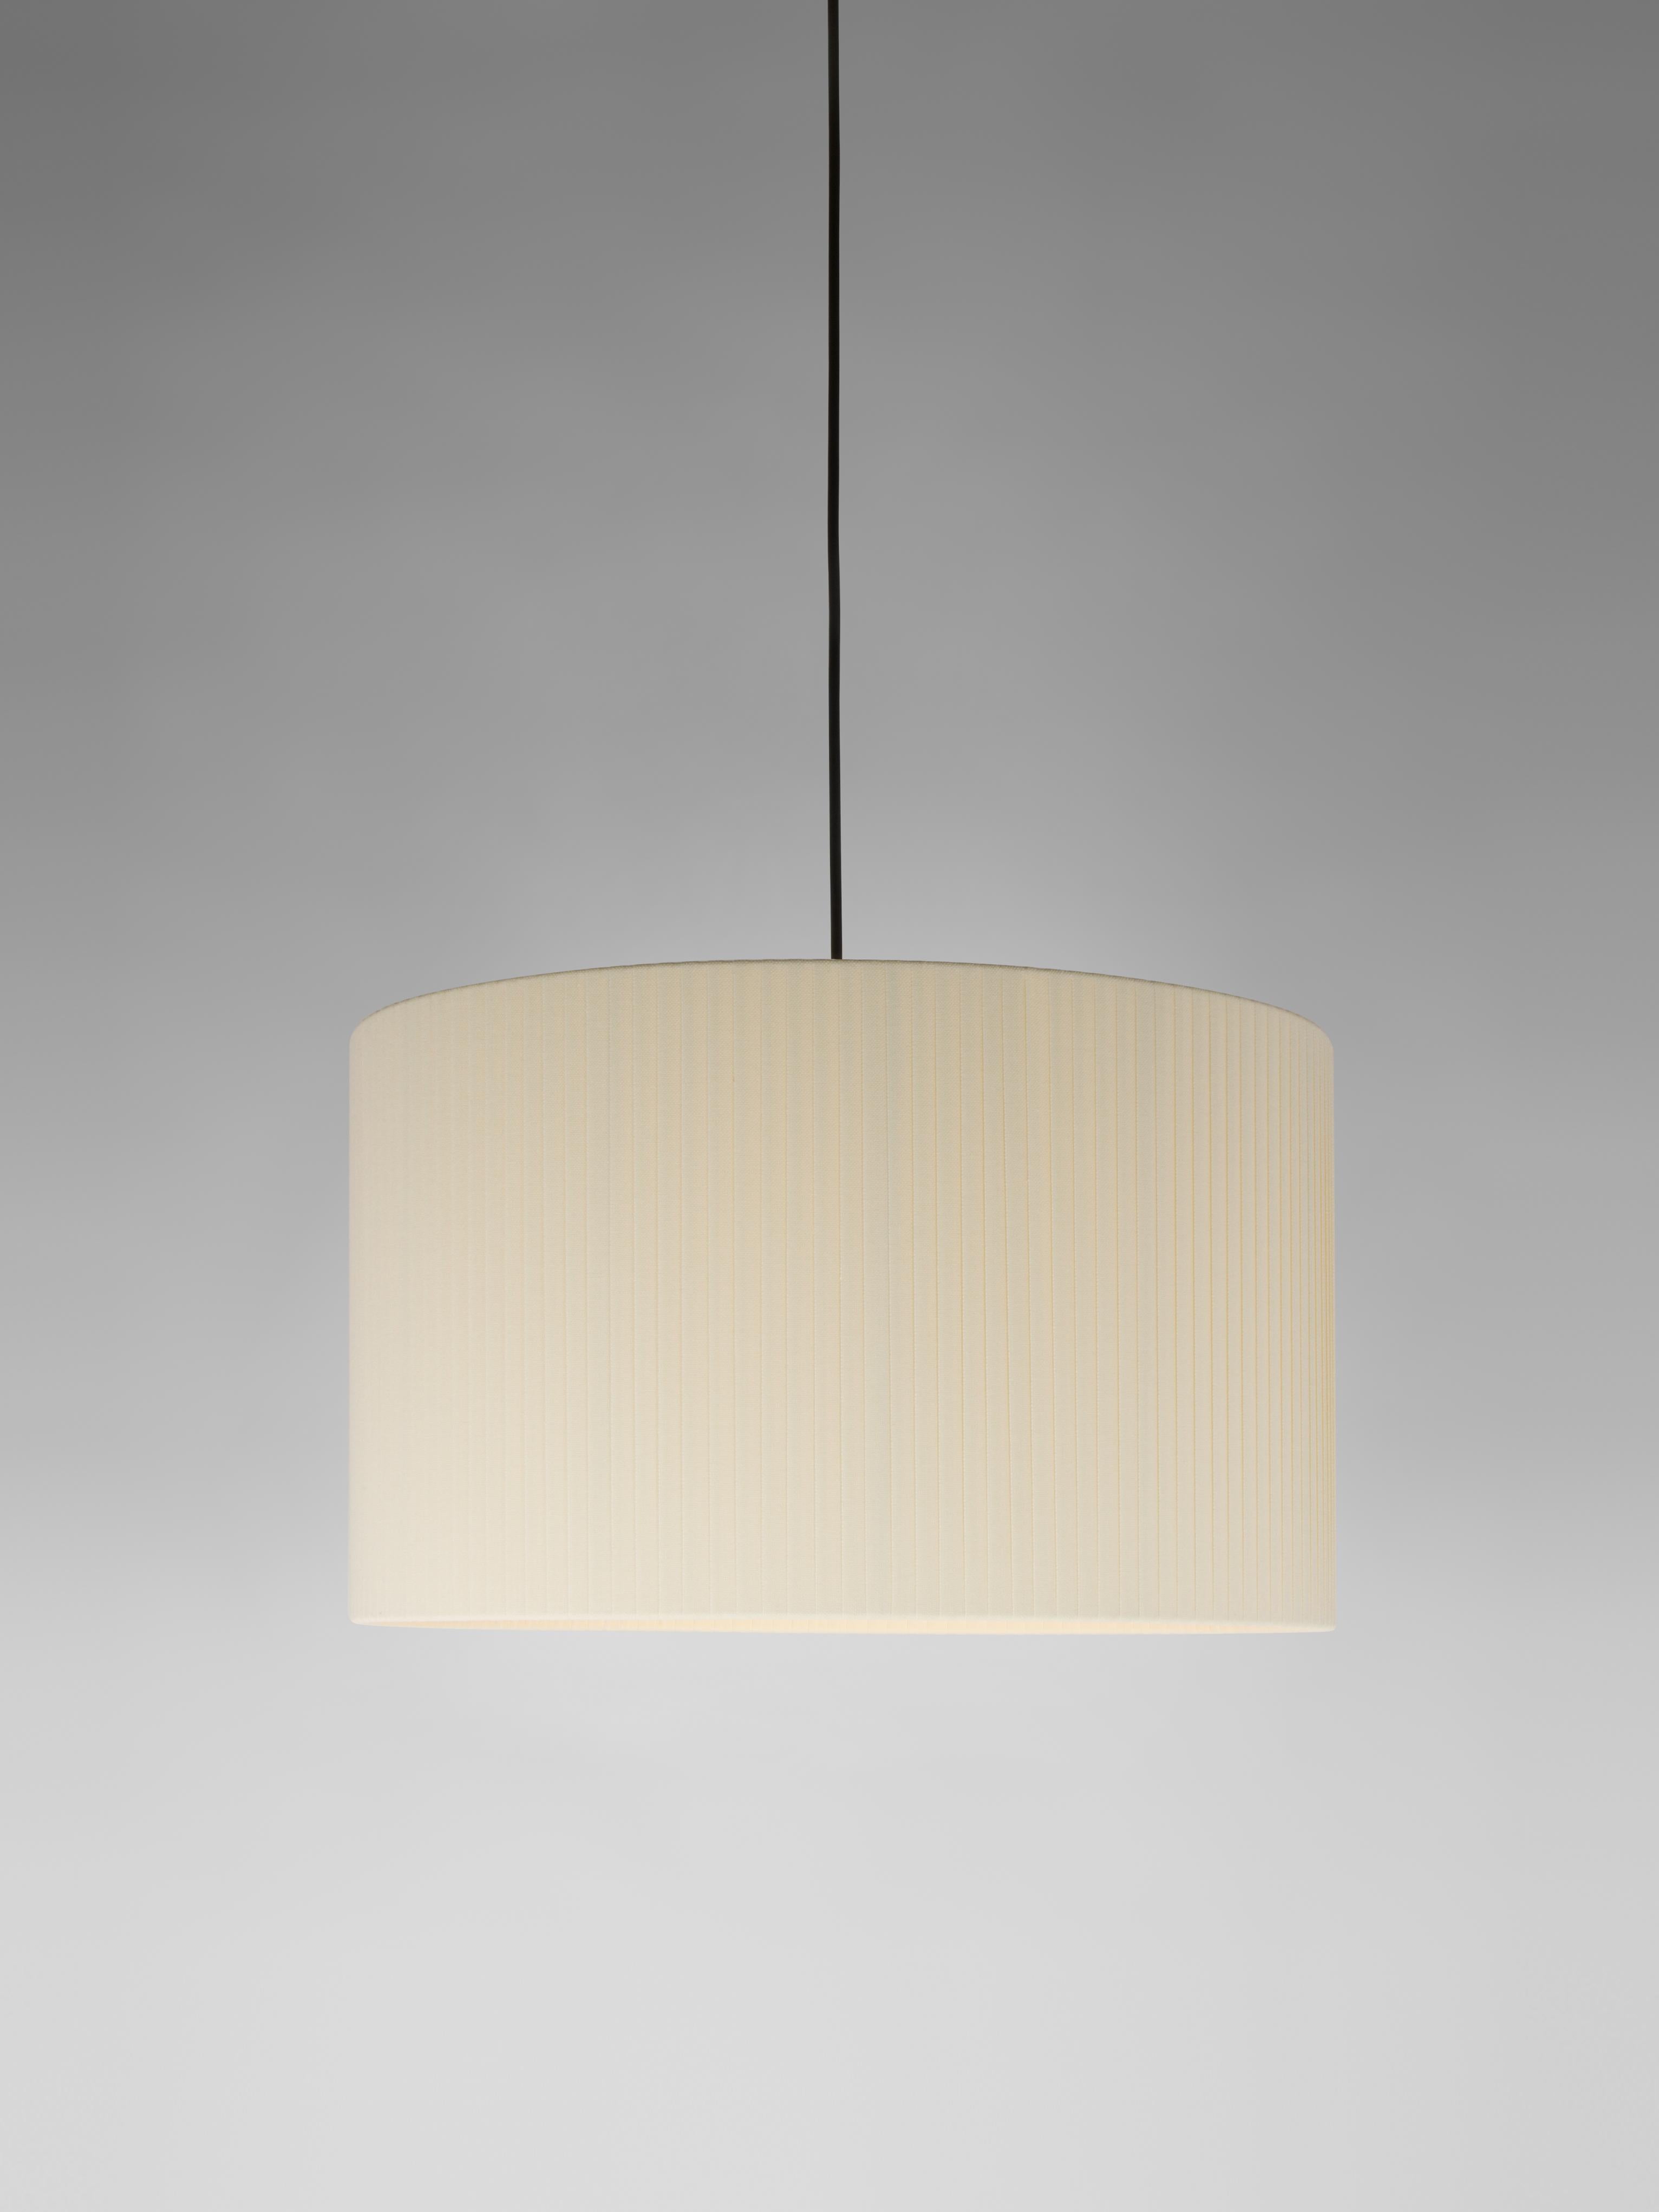 Natural Sísísí Cilíndricas GT2 pendant lamp by Santa & Cole
Dimensions: D 45 x H 27 cm
Materials: Metal, ribbon.
Available in other colors.
Also available in two lights version.

Cylindrical in shape, there are two sizes: the PT2 being the